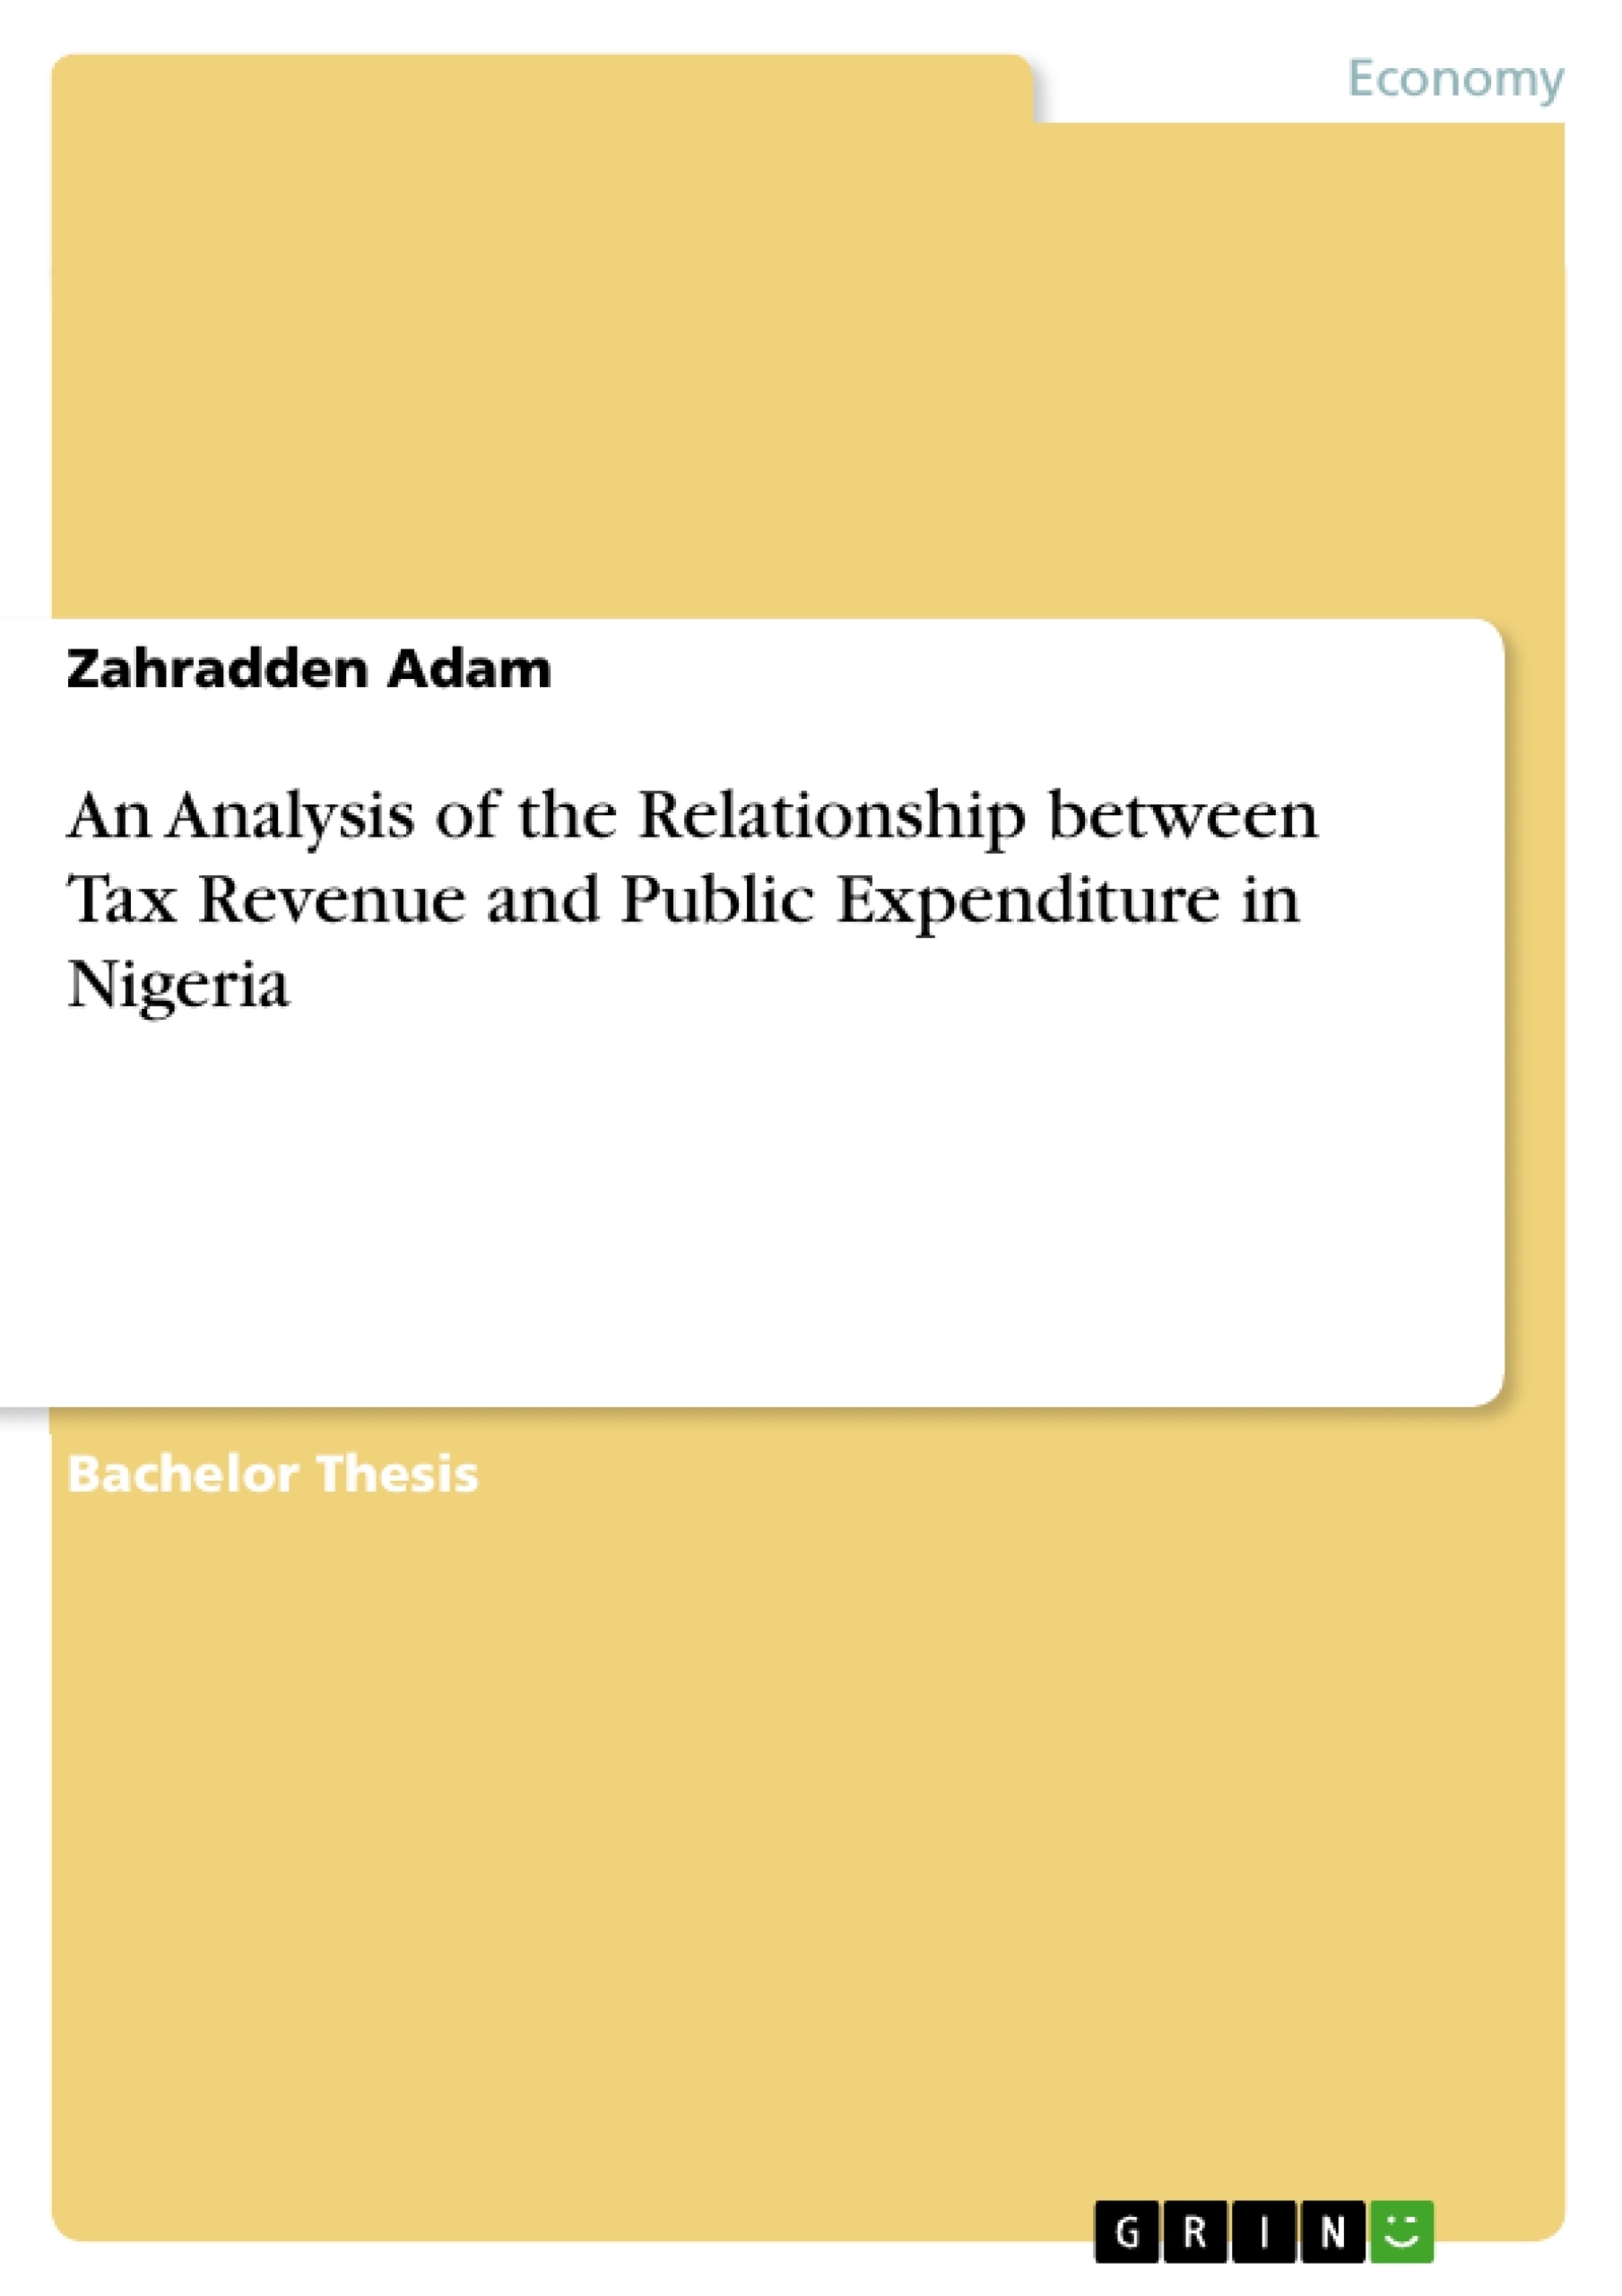 Titre: An Analysis of the Relationship between Tax Revenue and Public Expenditure in Nigeria